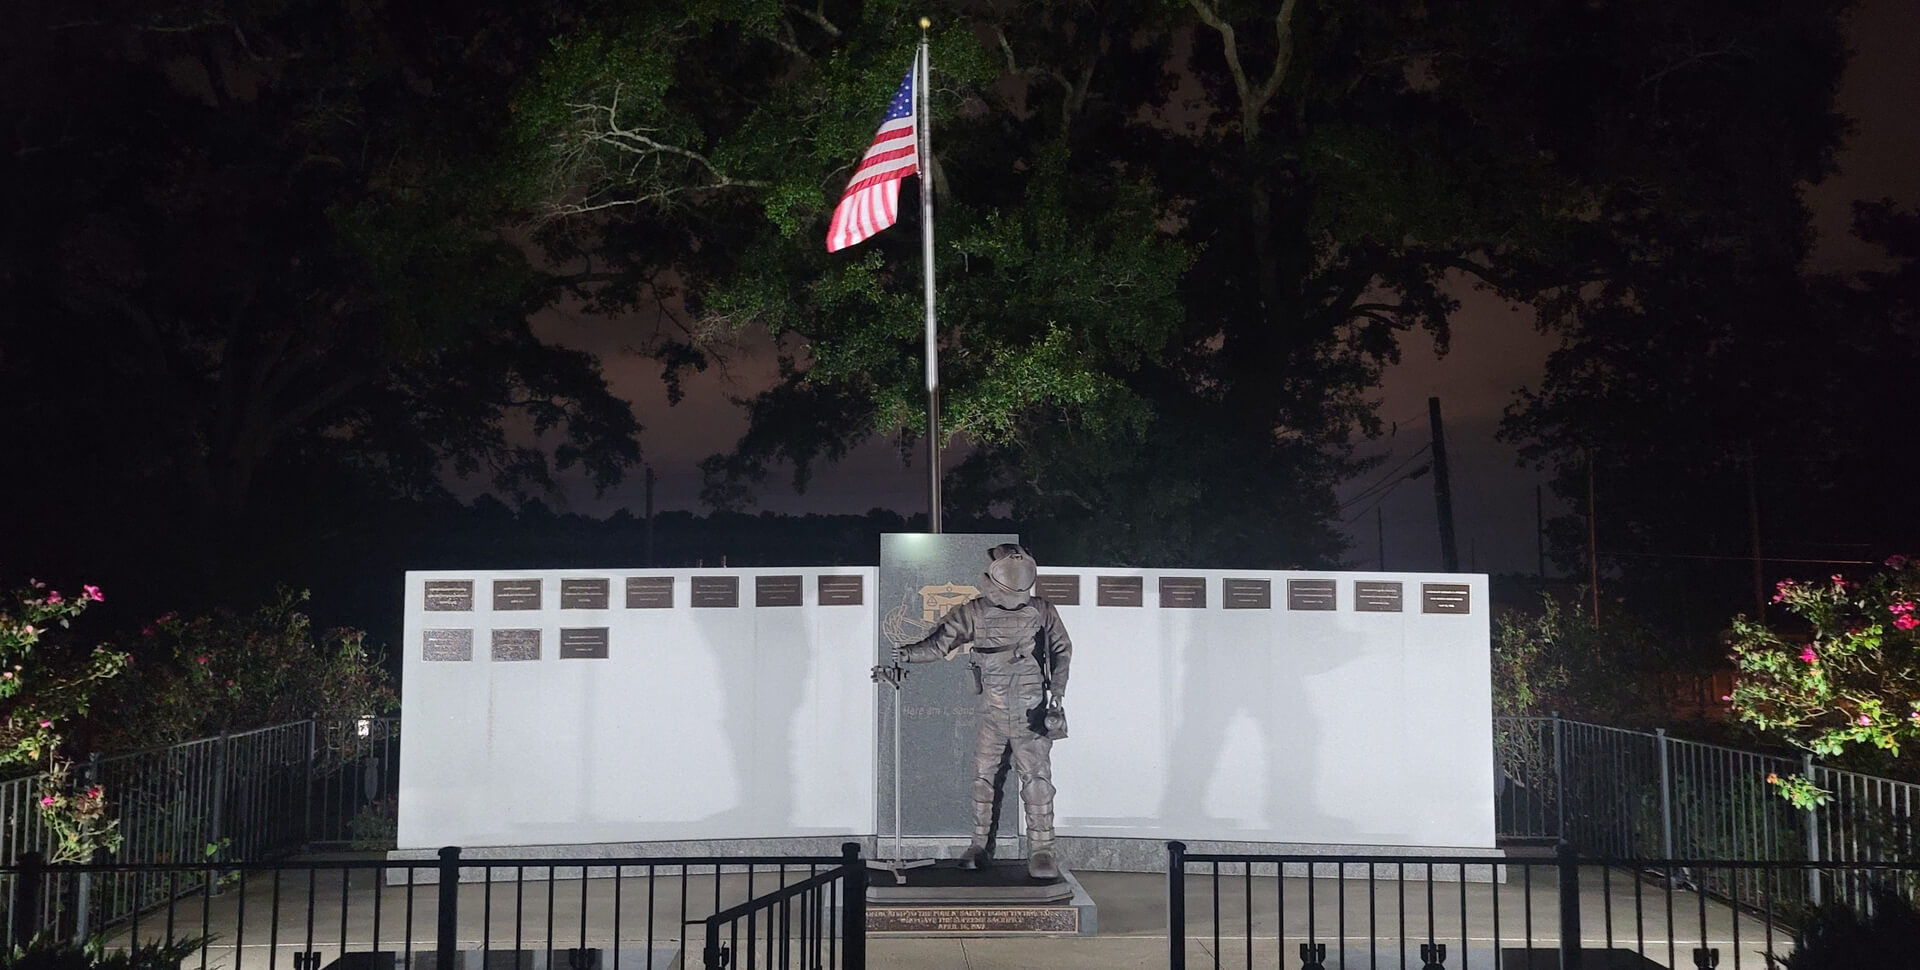 A beautiful picture of a war hero statue at night